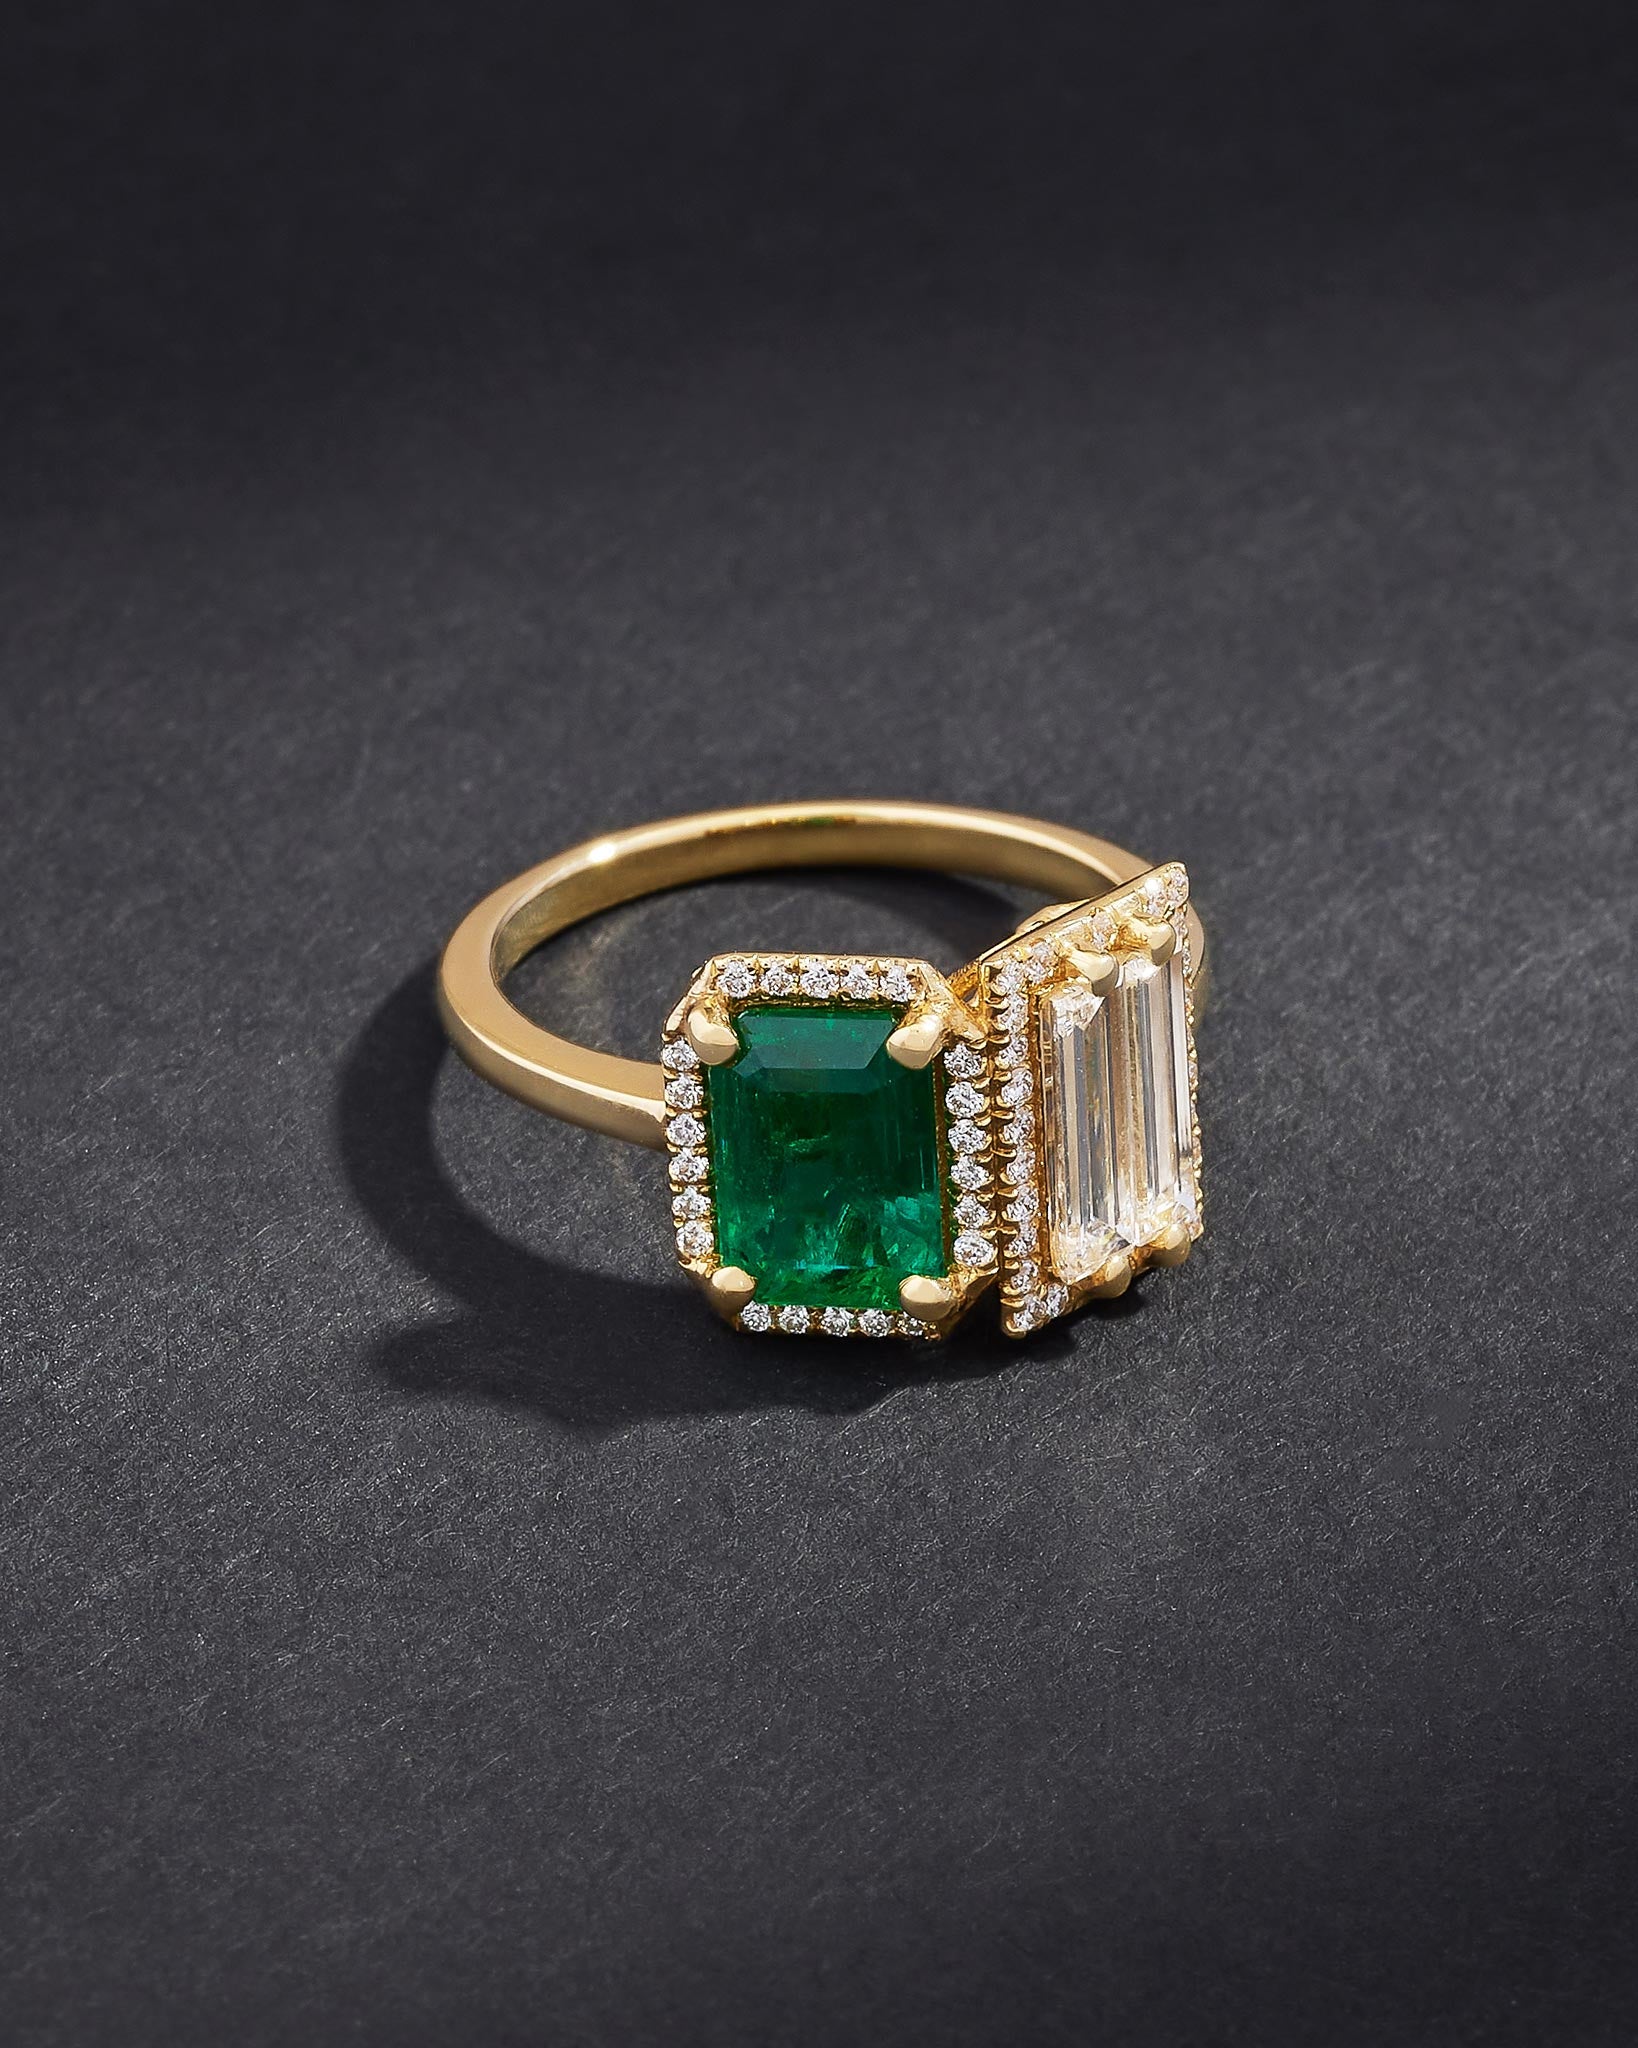 Suzanne Kalan One of a Kind Toi et Moi Emerald & Double Baguette Diamond Ring in 18k yellow gold